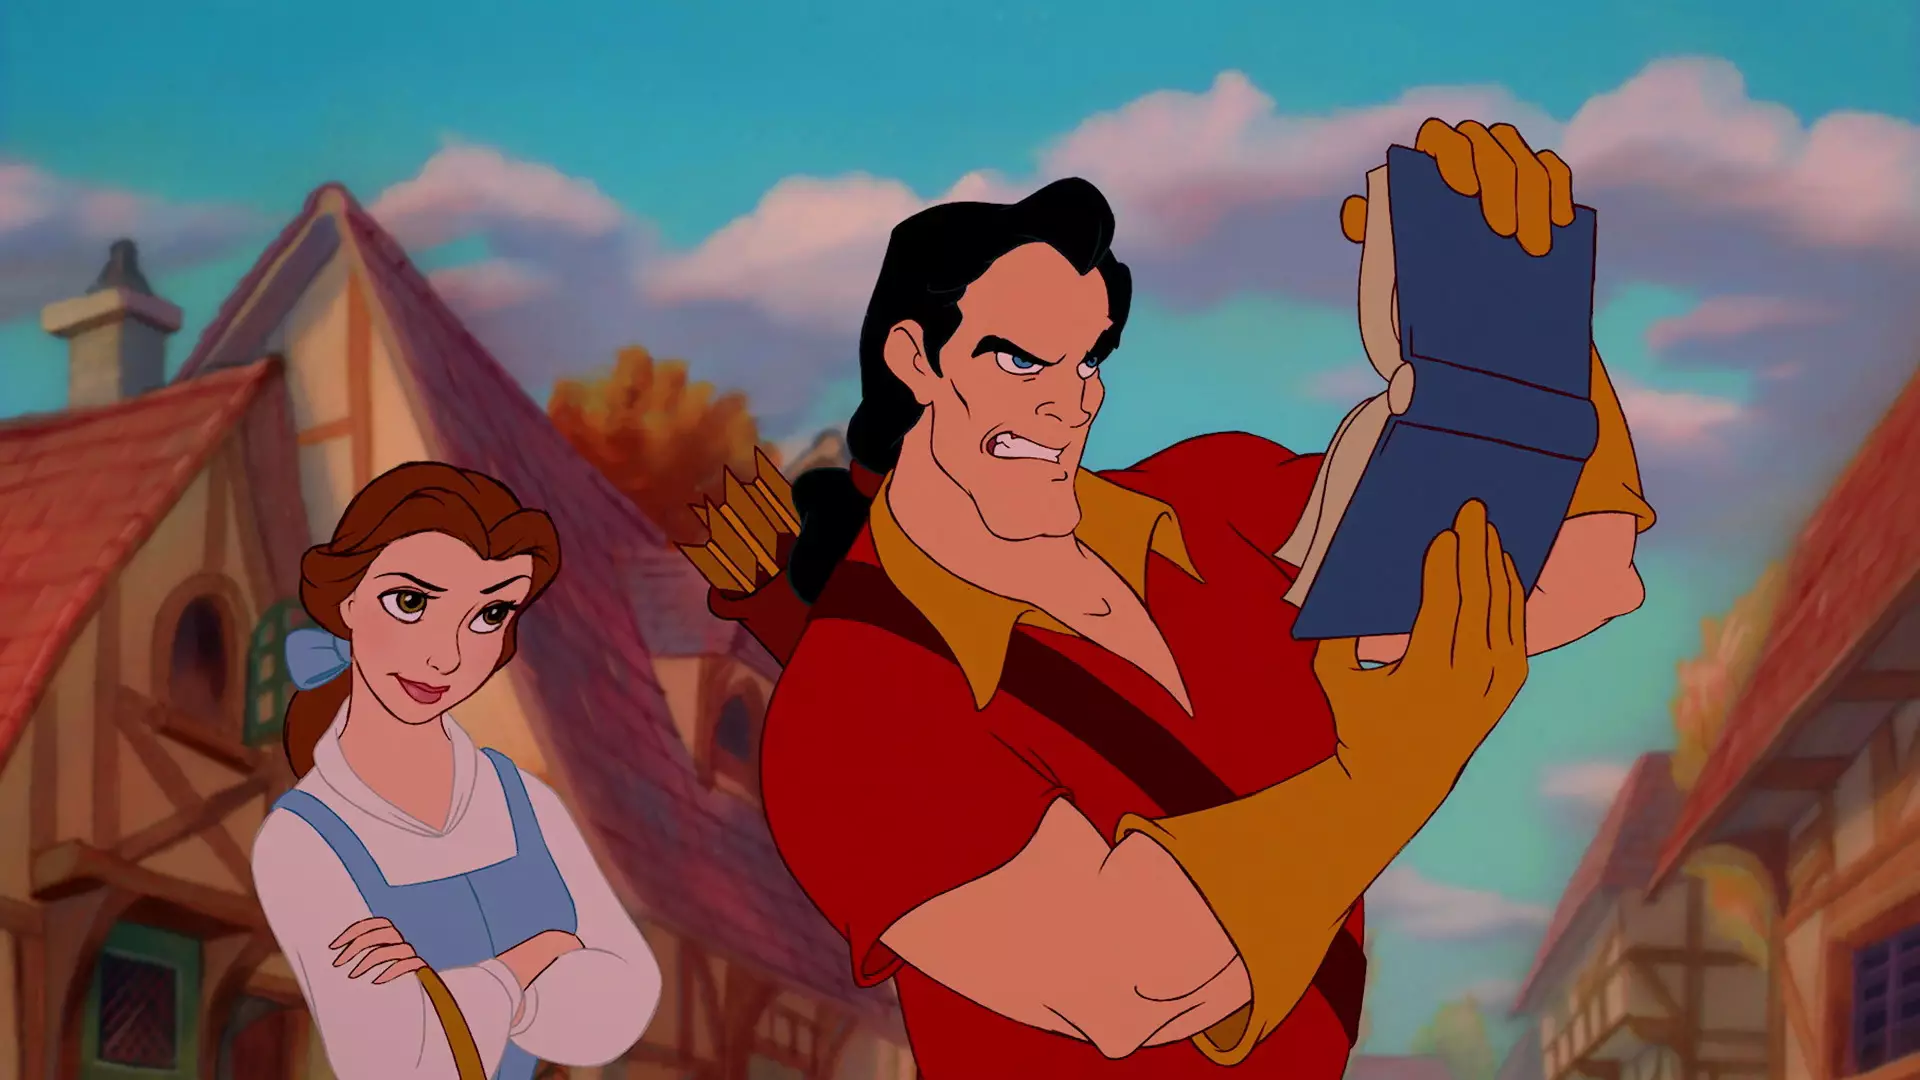 The series will centre around Gaston and LeFou (